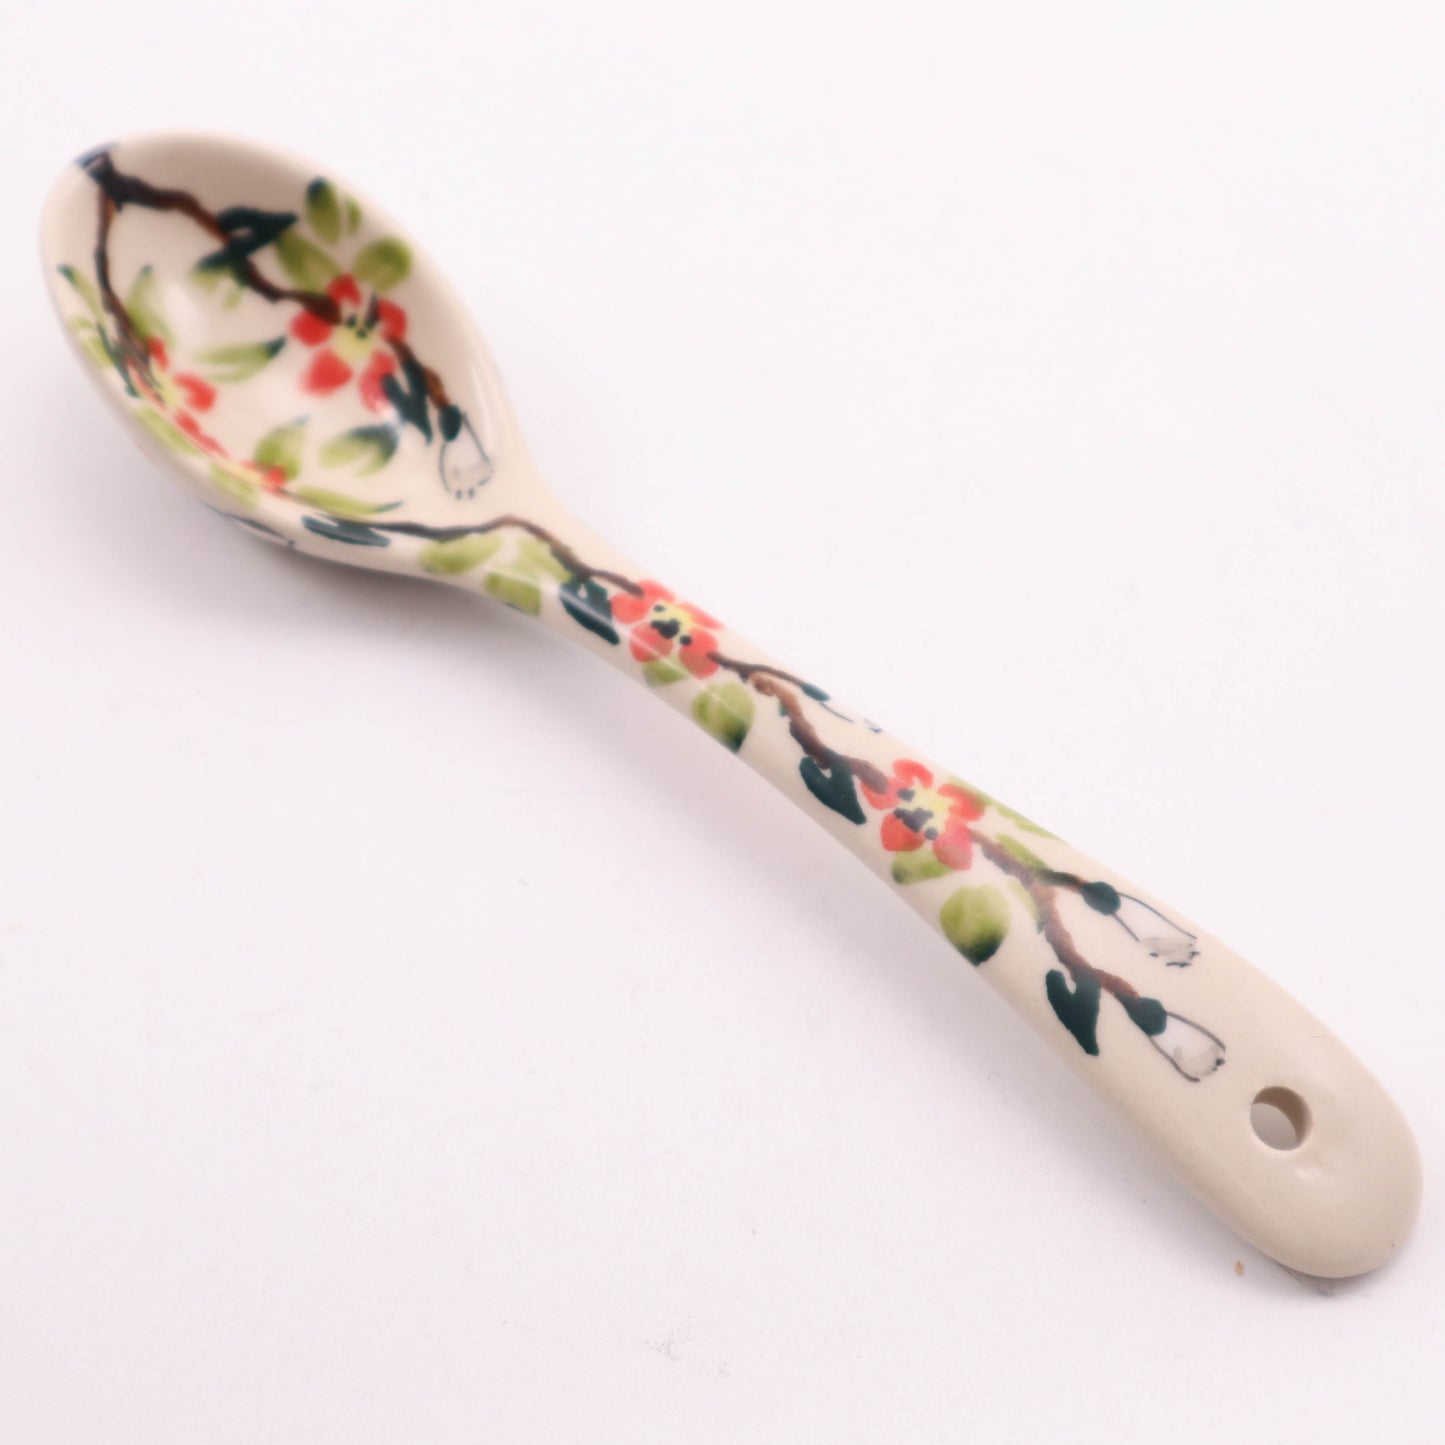 6.5" Small Spoon. Pattern: Apple Blossom Red